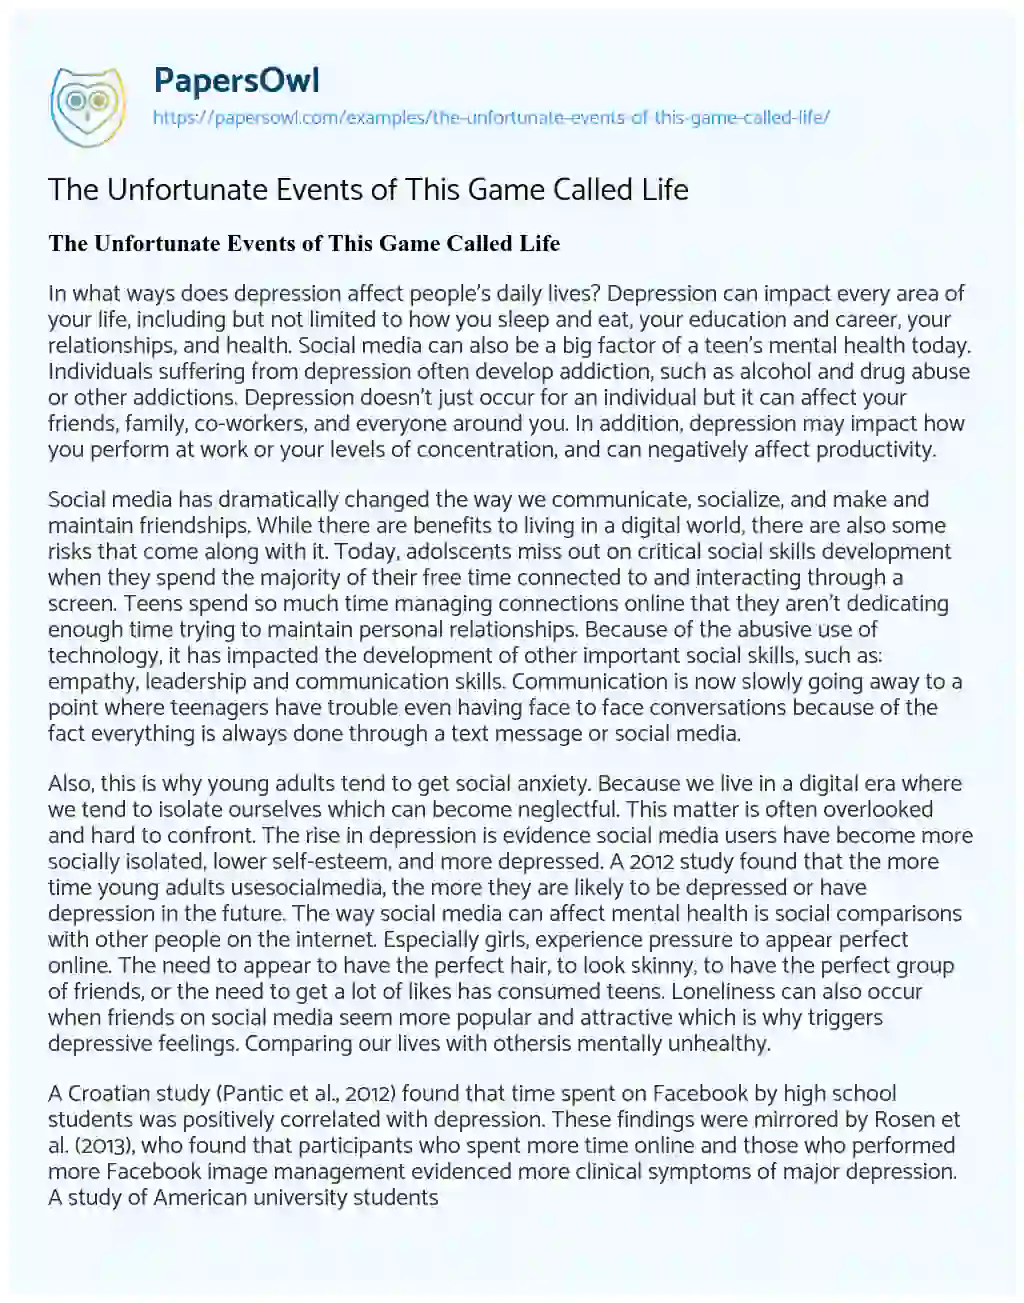 Essay on The Unfortunate Events of this Game Called Life